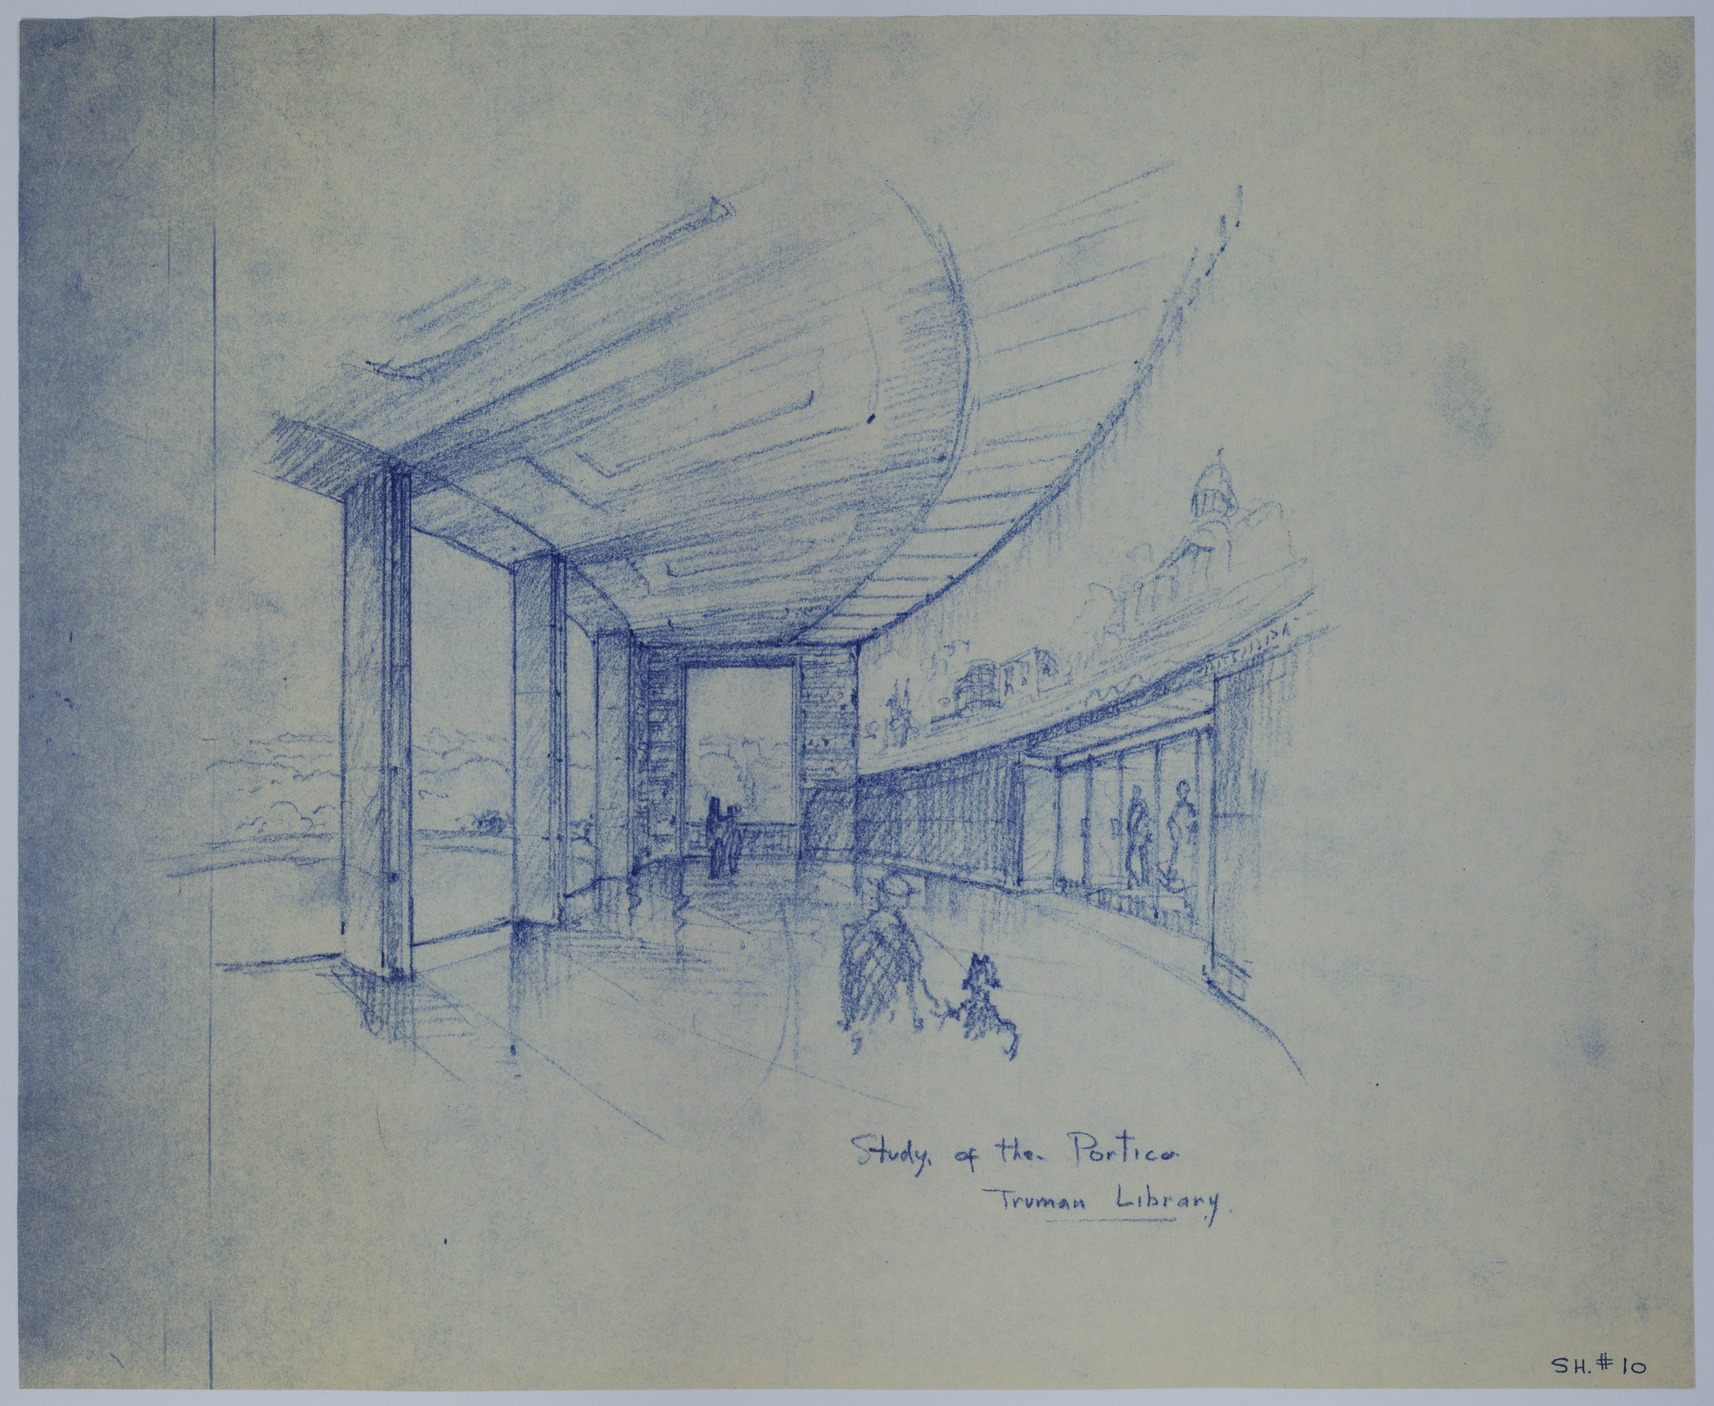 Drawing of the Proposed Portico of the Harry S. Truman Library